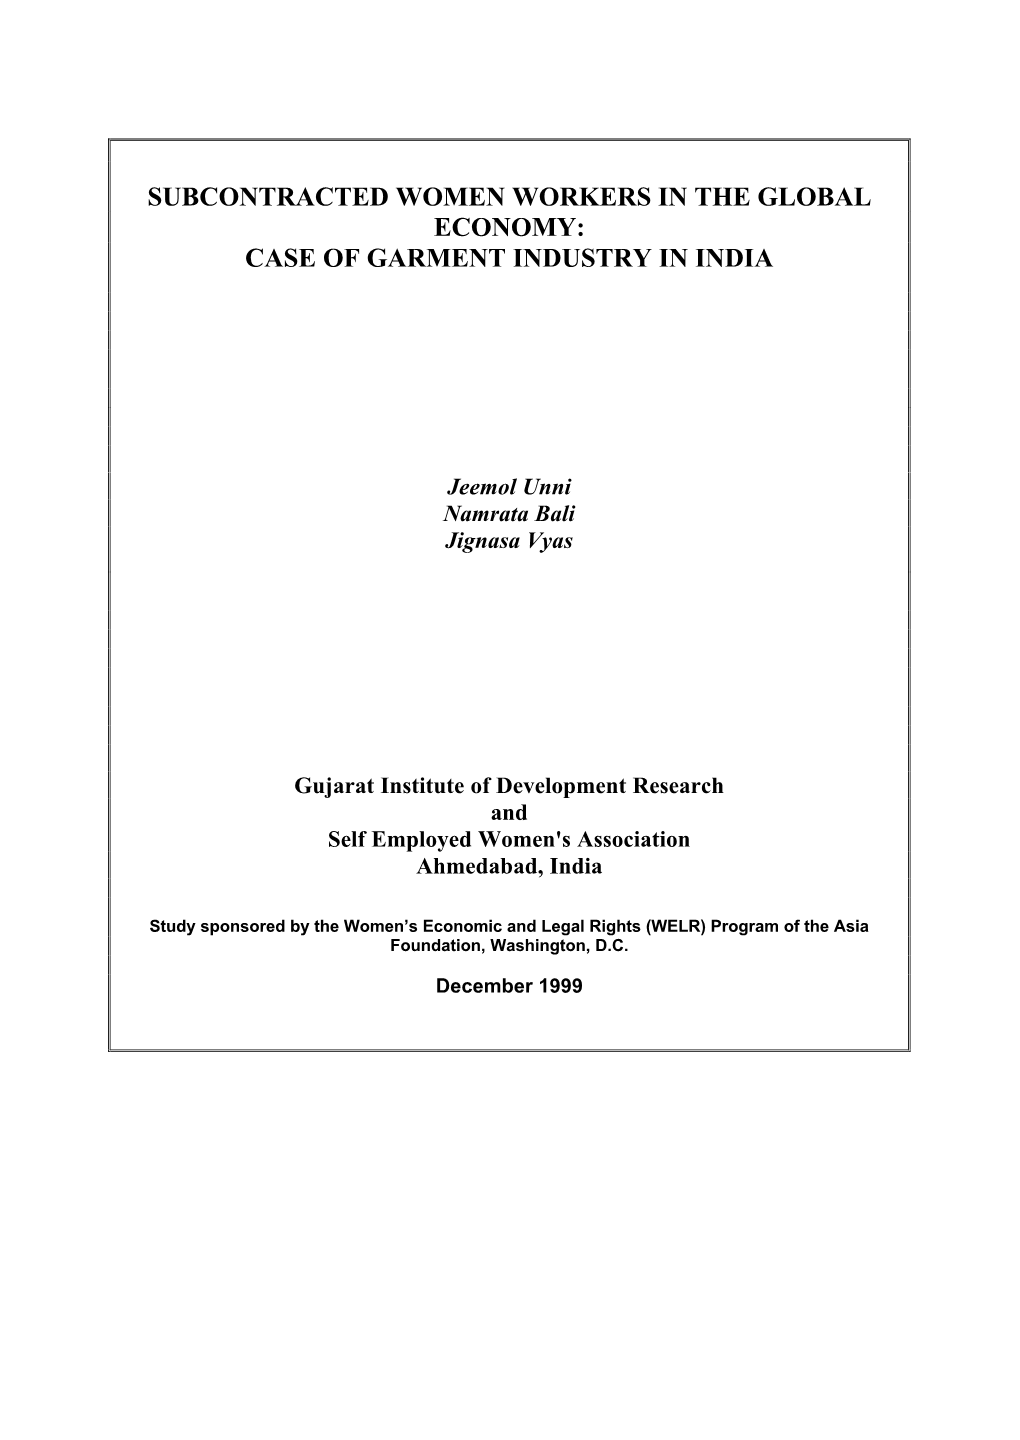 Subcontracted Women Workers in the Global Economy: Case of Garment Industry in India